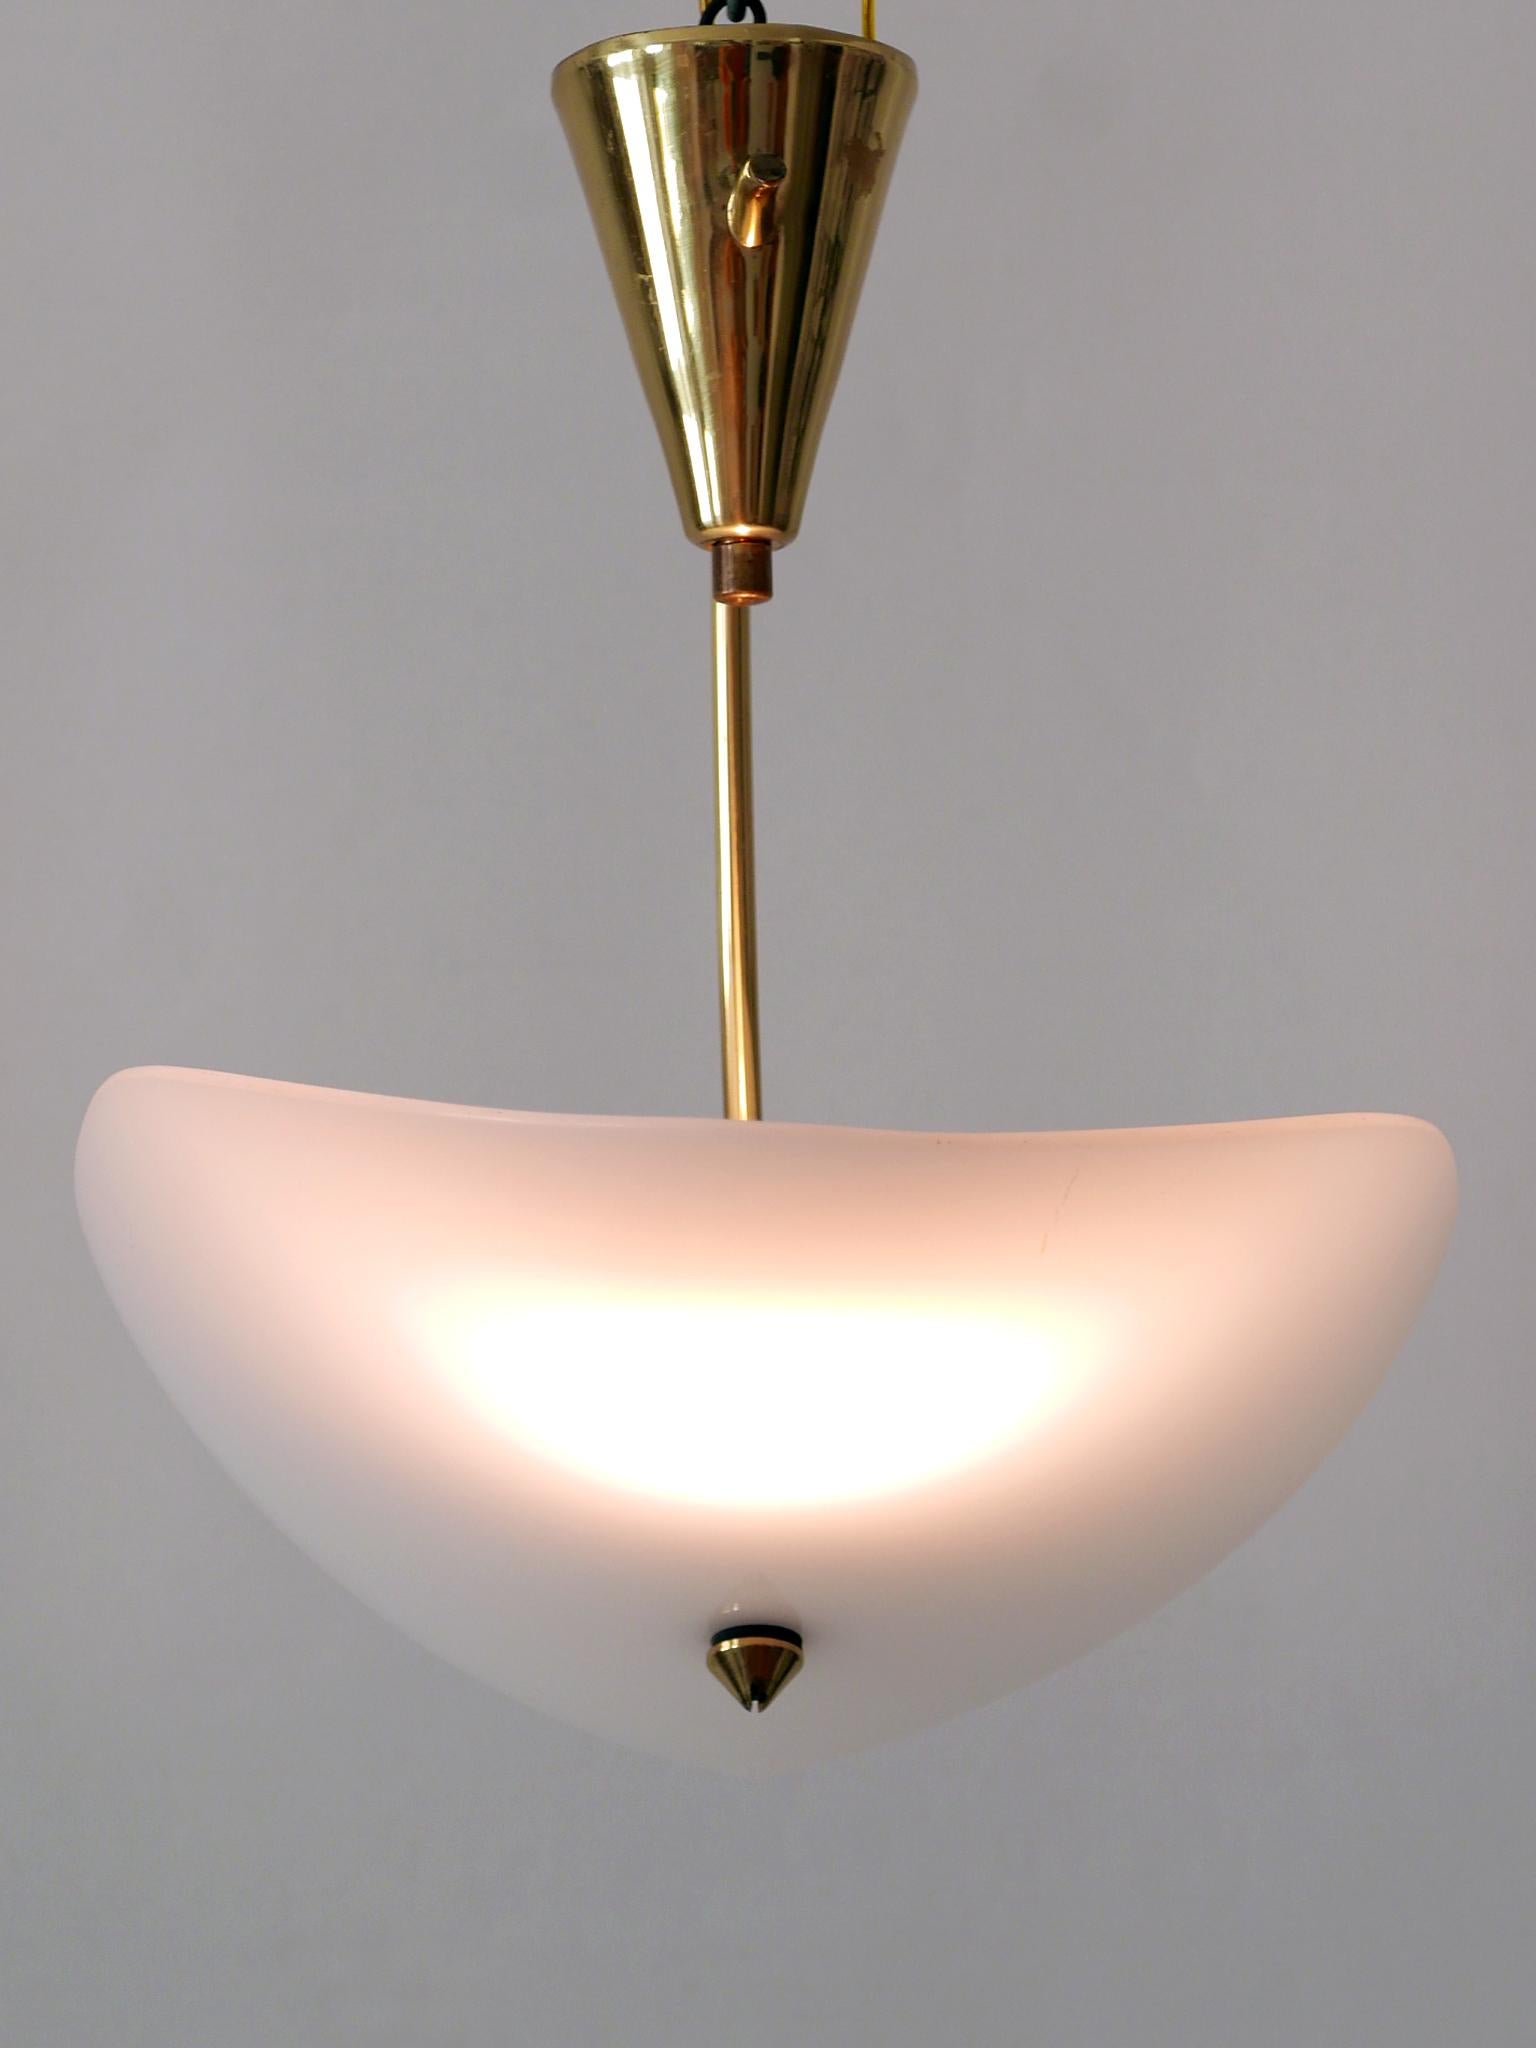 Extremely Rare and Elegant Lucite & Brass Ceiling Lamp Germany 1960s For Sale 2